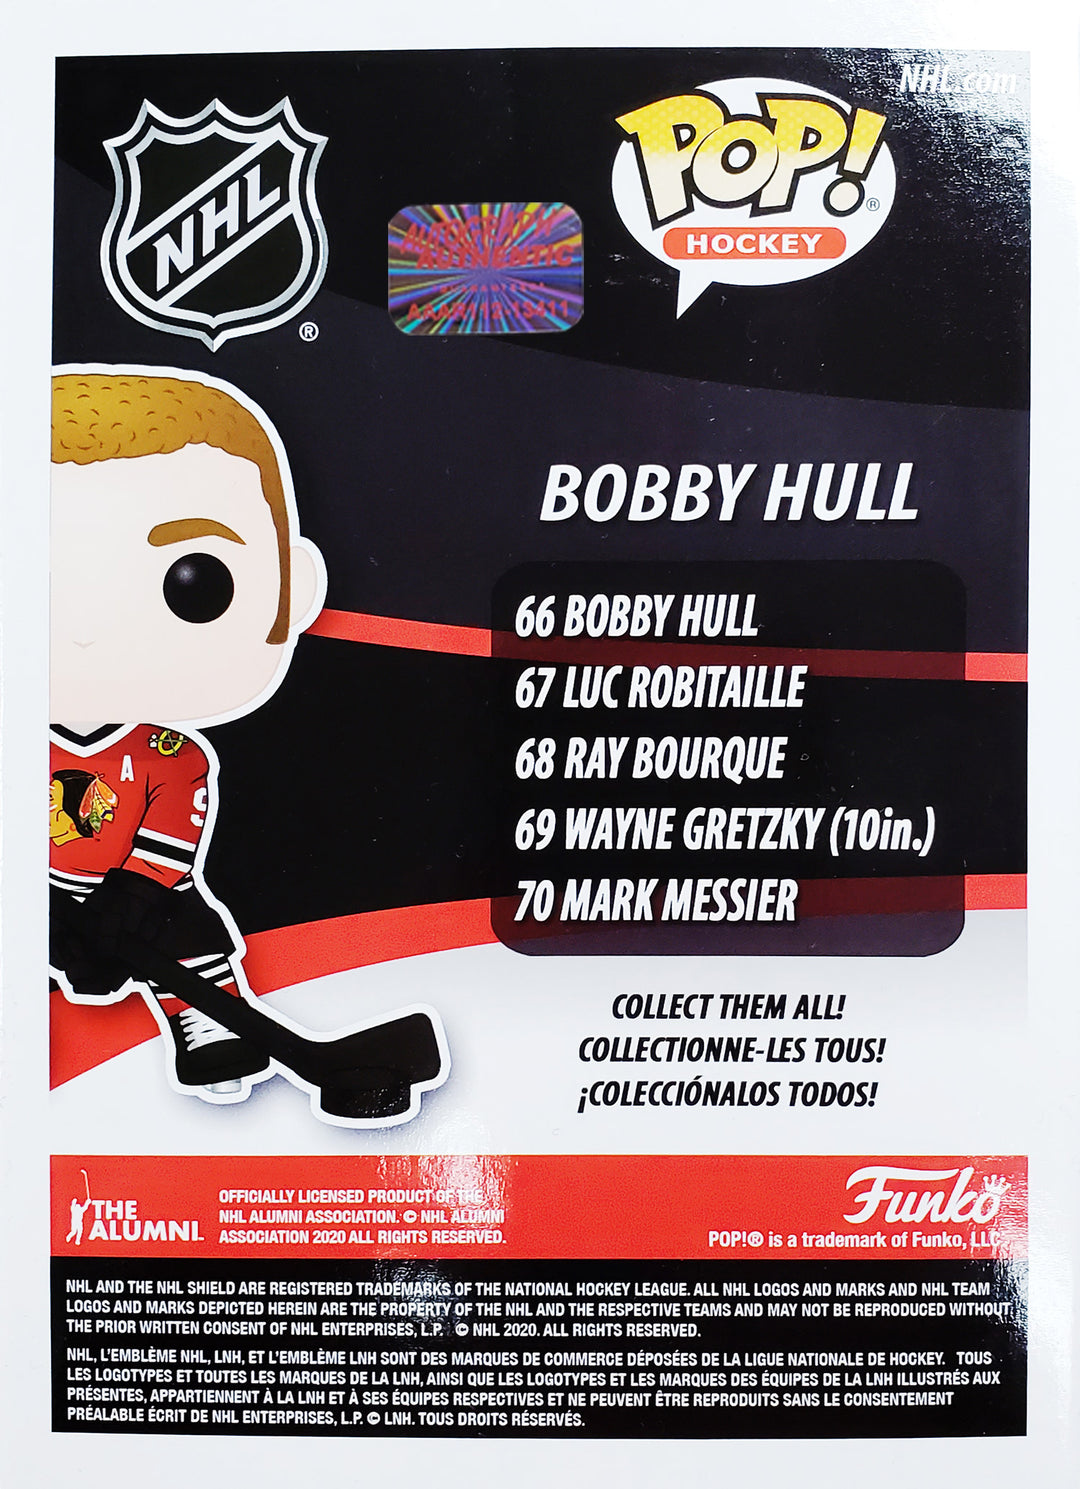 Bobby Hull Autographed Funko Pop! - Chicago Blackhawks, Chicago Blackhawks, NHL, Hockey, Autographed, Signed, AACMH32724